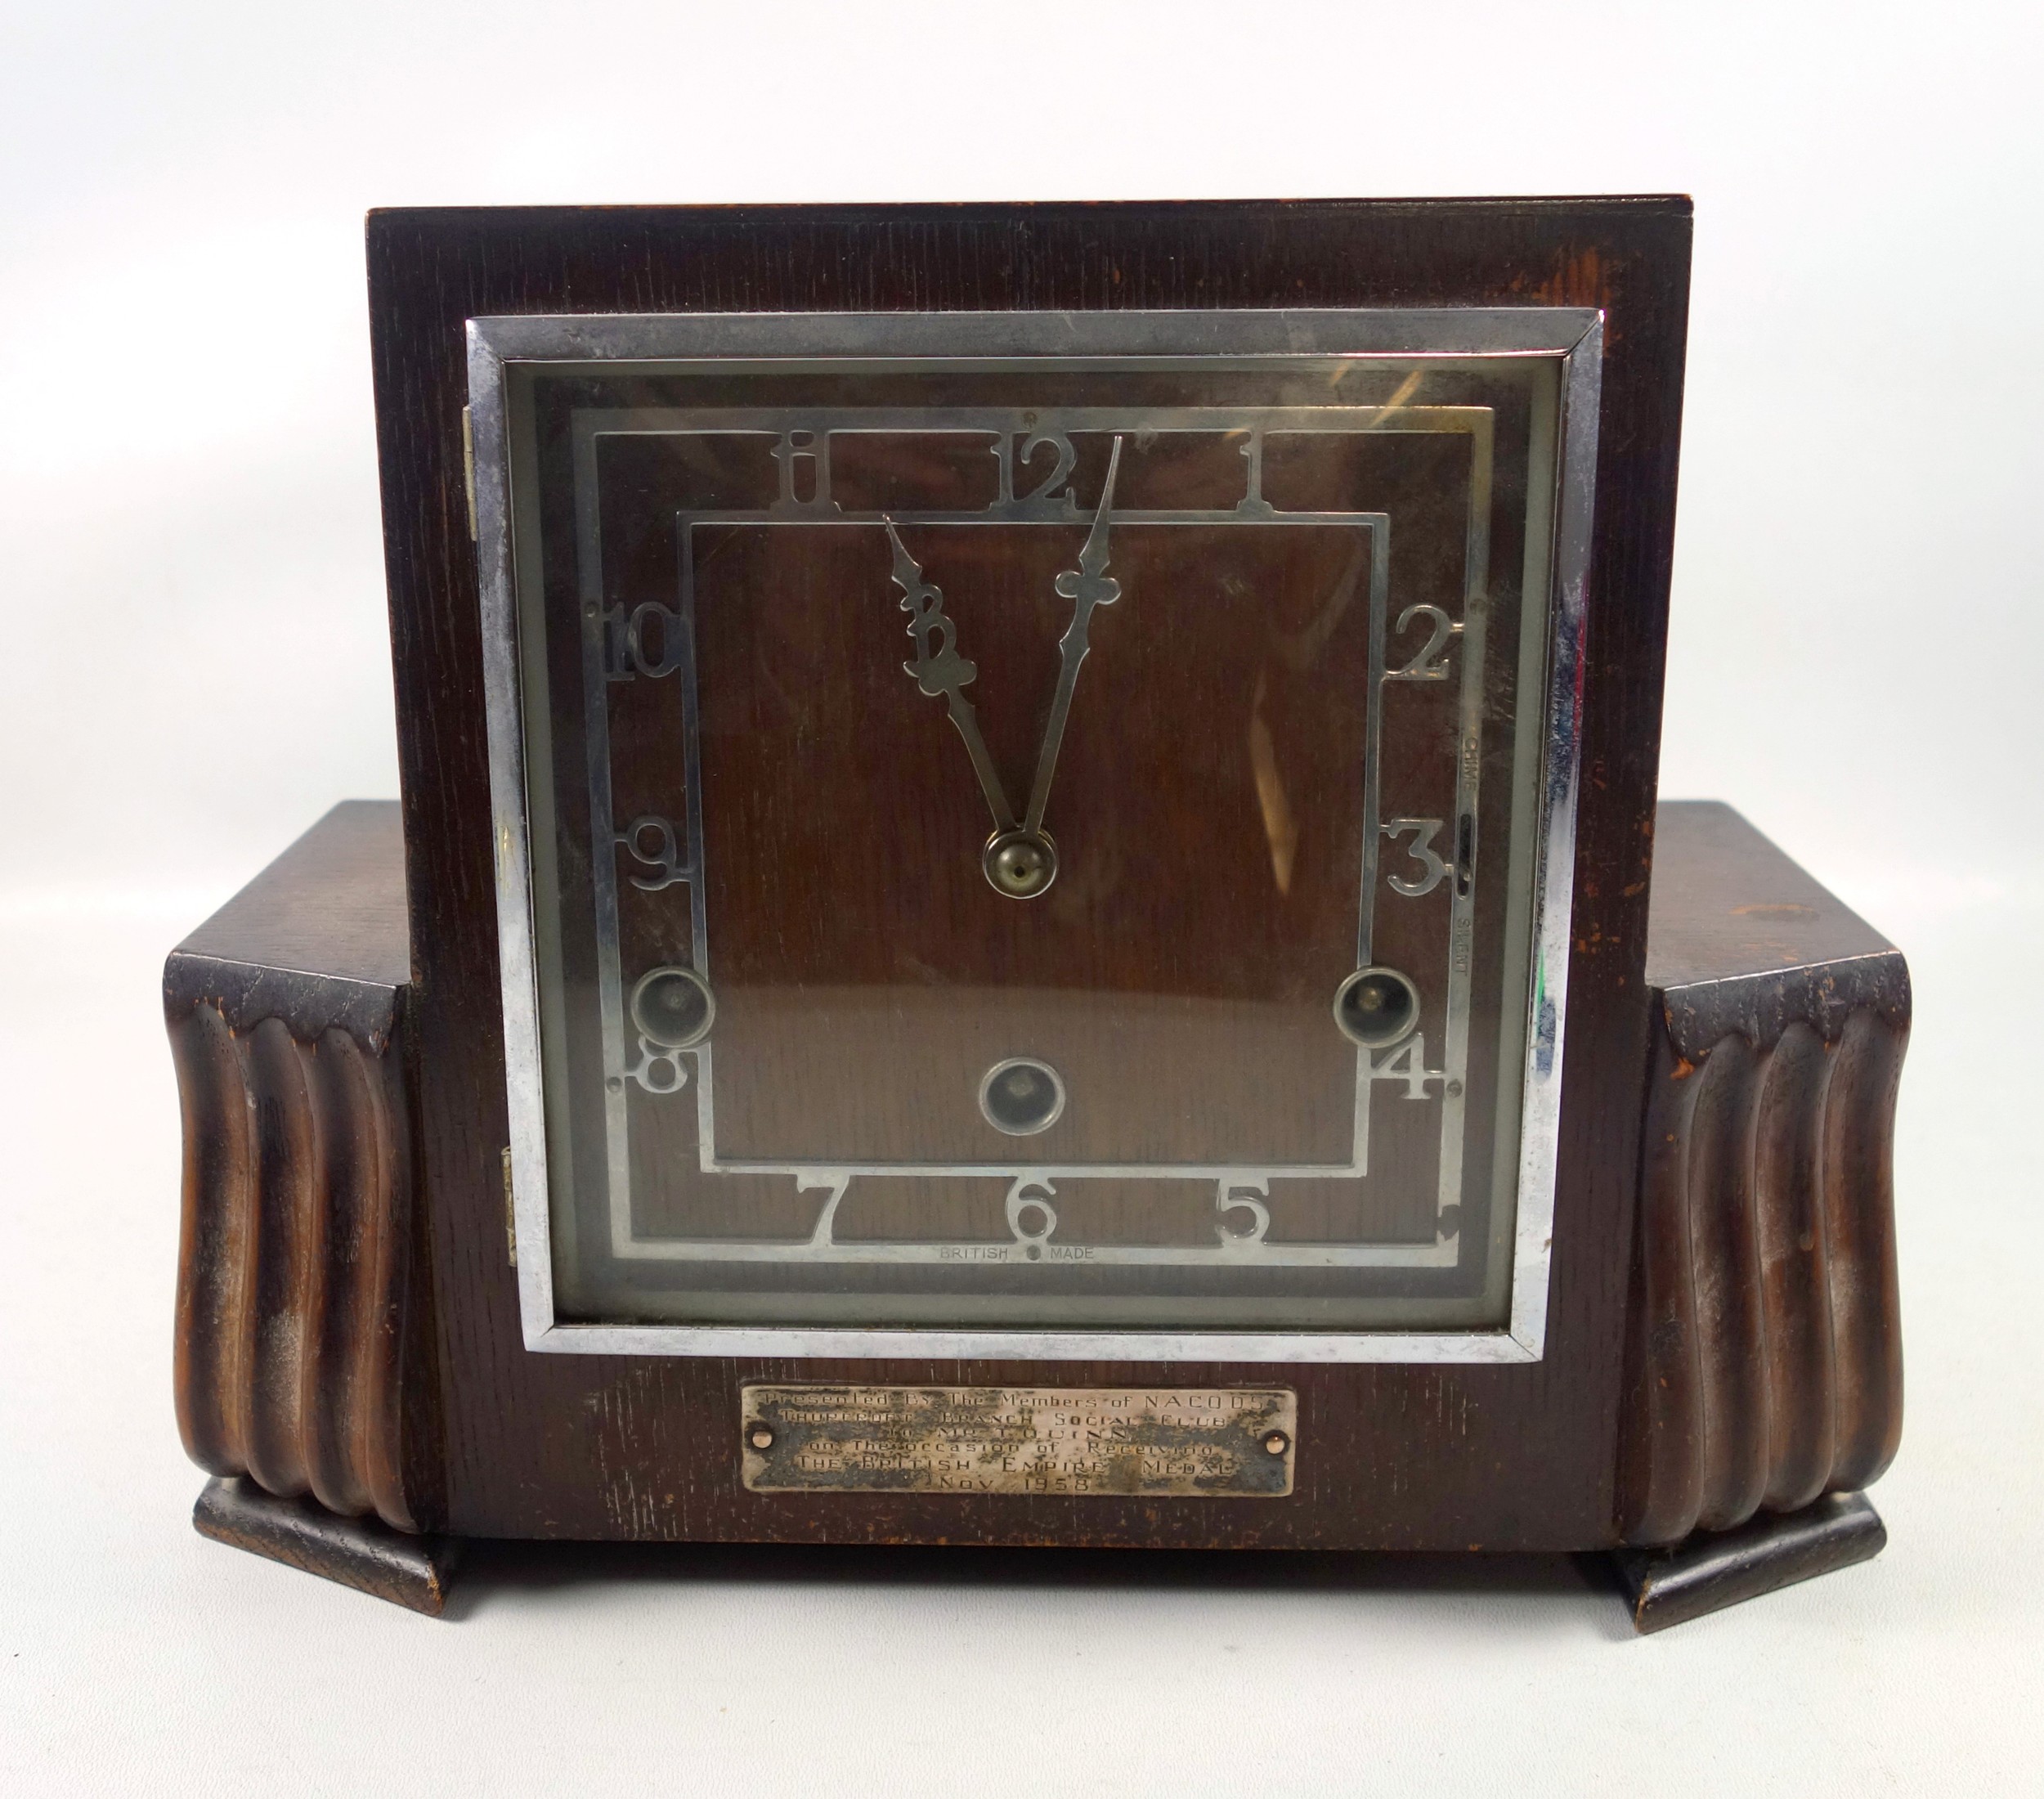 British Art deco period mantel clock with an 8 day movement, chime striking on straight gongs, in an